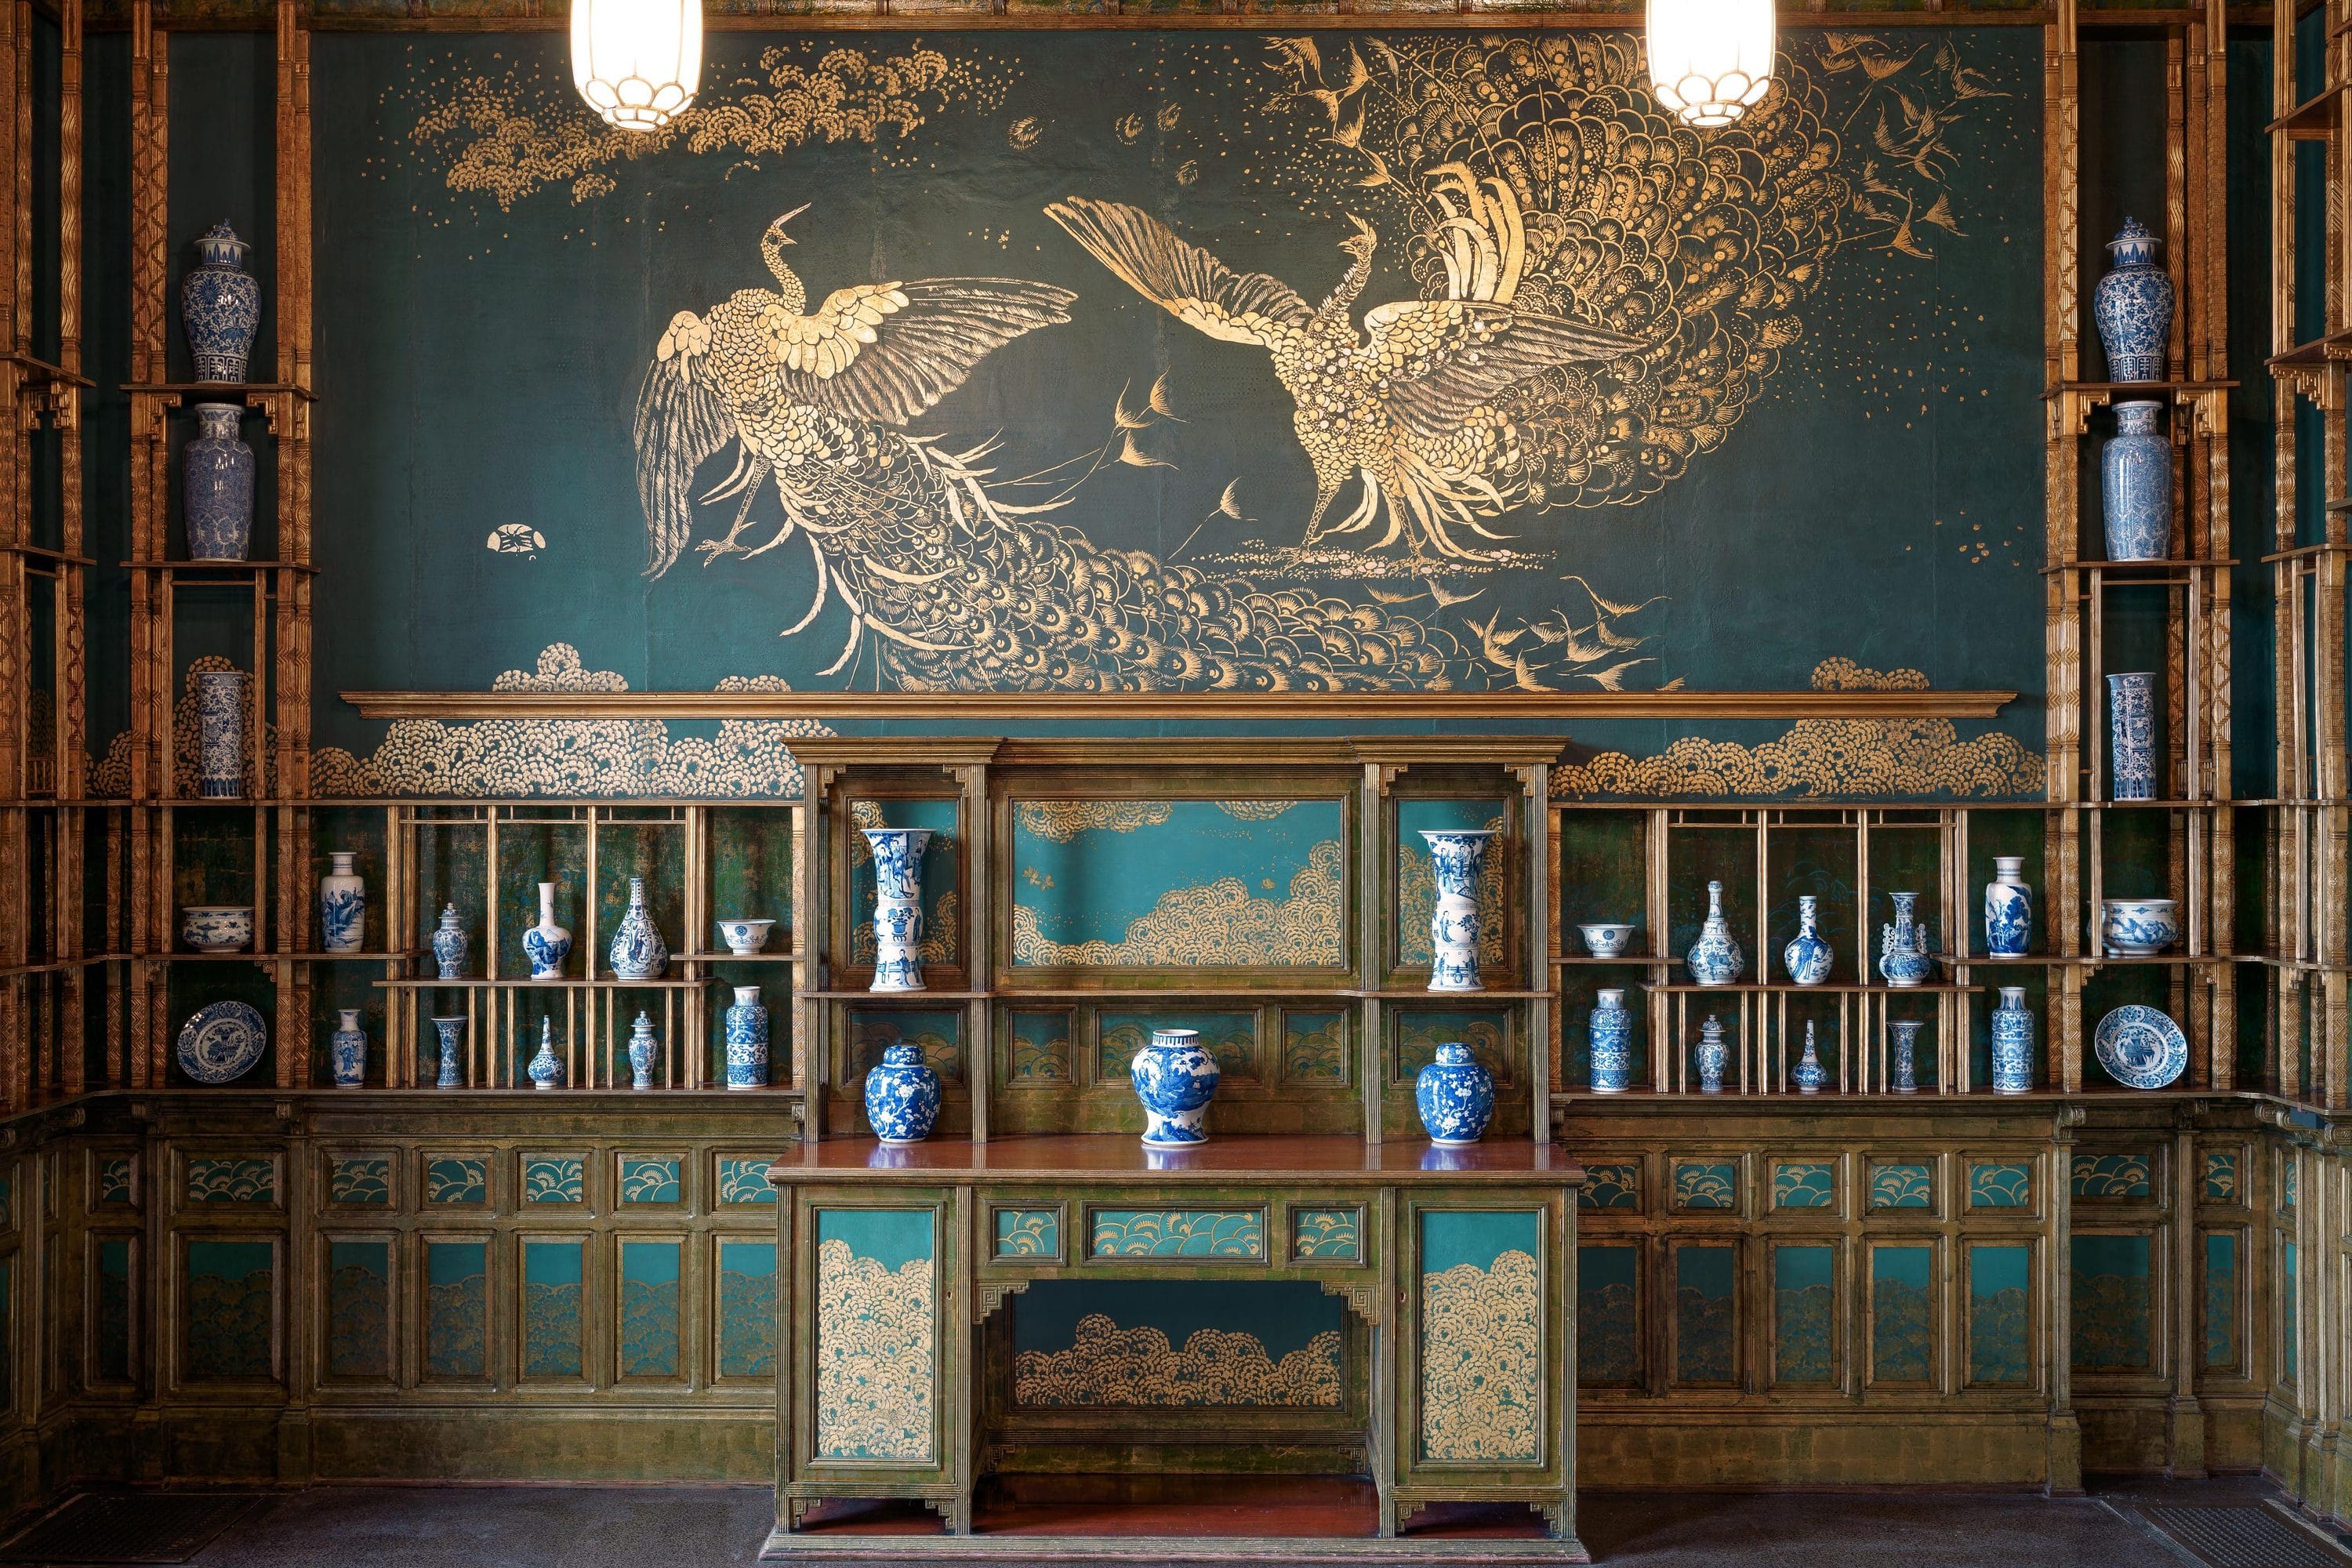 Chinese porcelains displayed inside The Peacock Room at the Freer Gallery of Art